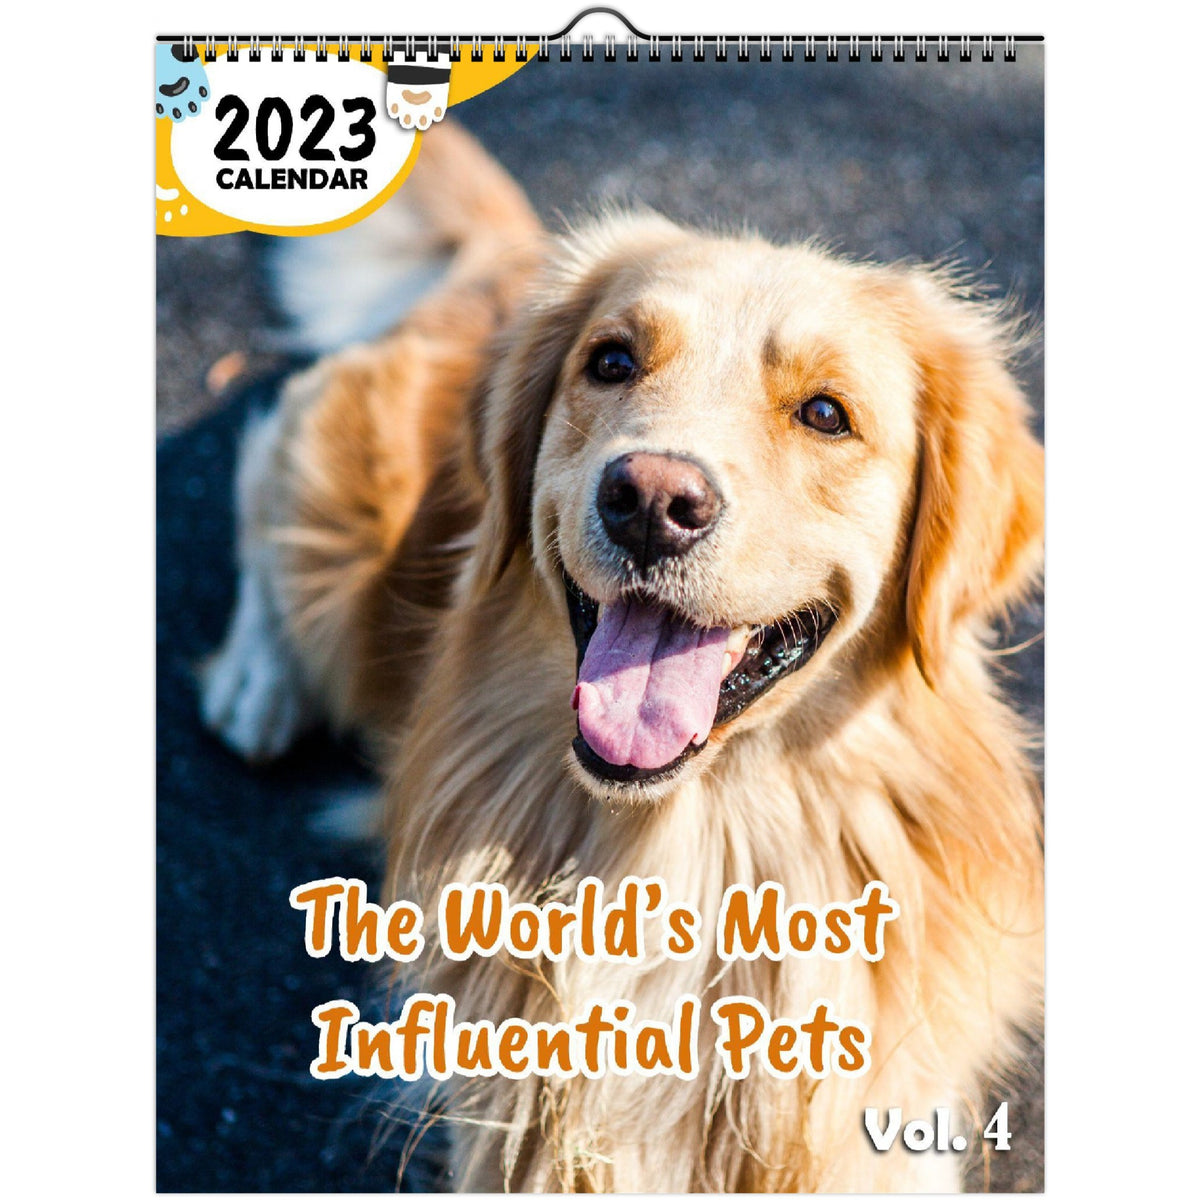 The World's Most Influential Pets Volume Four 2023 Wall Calendar The